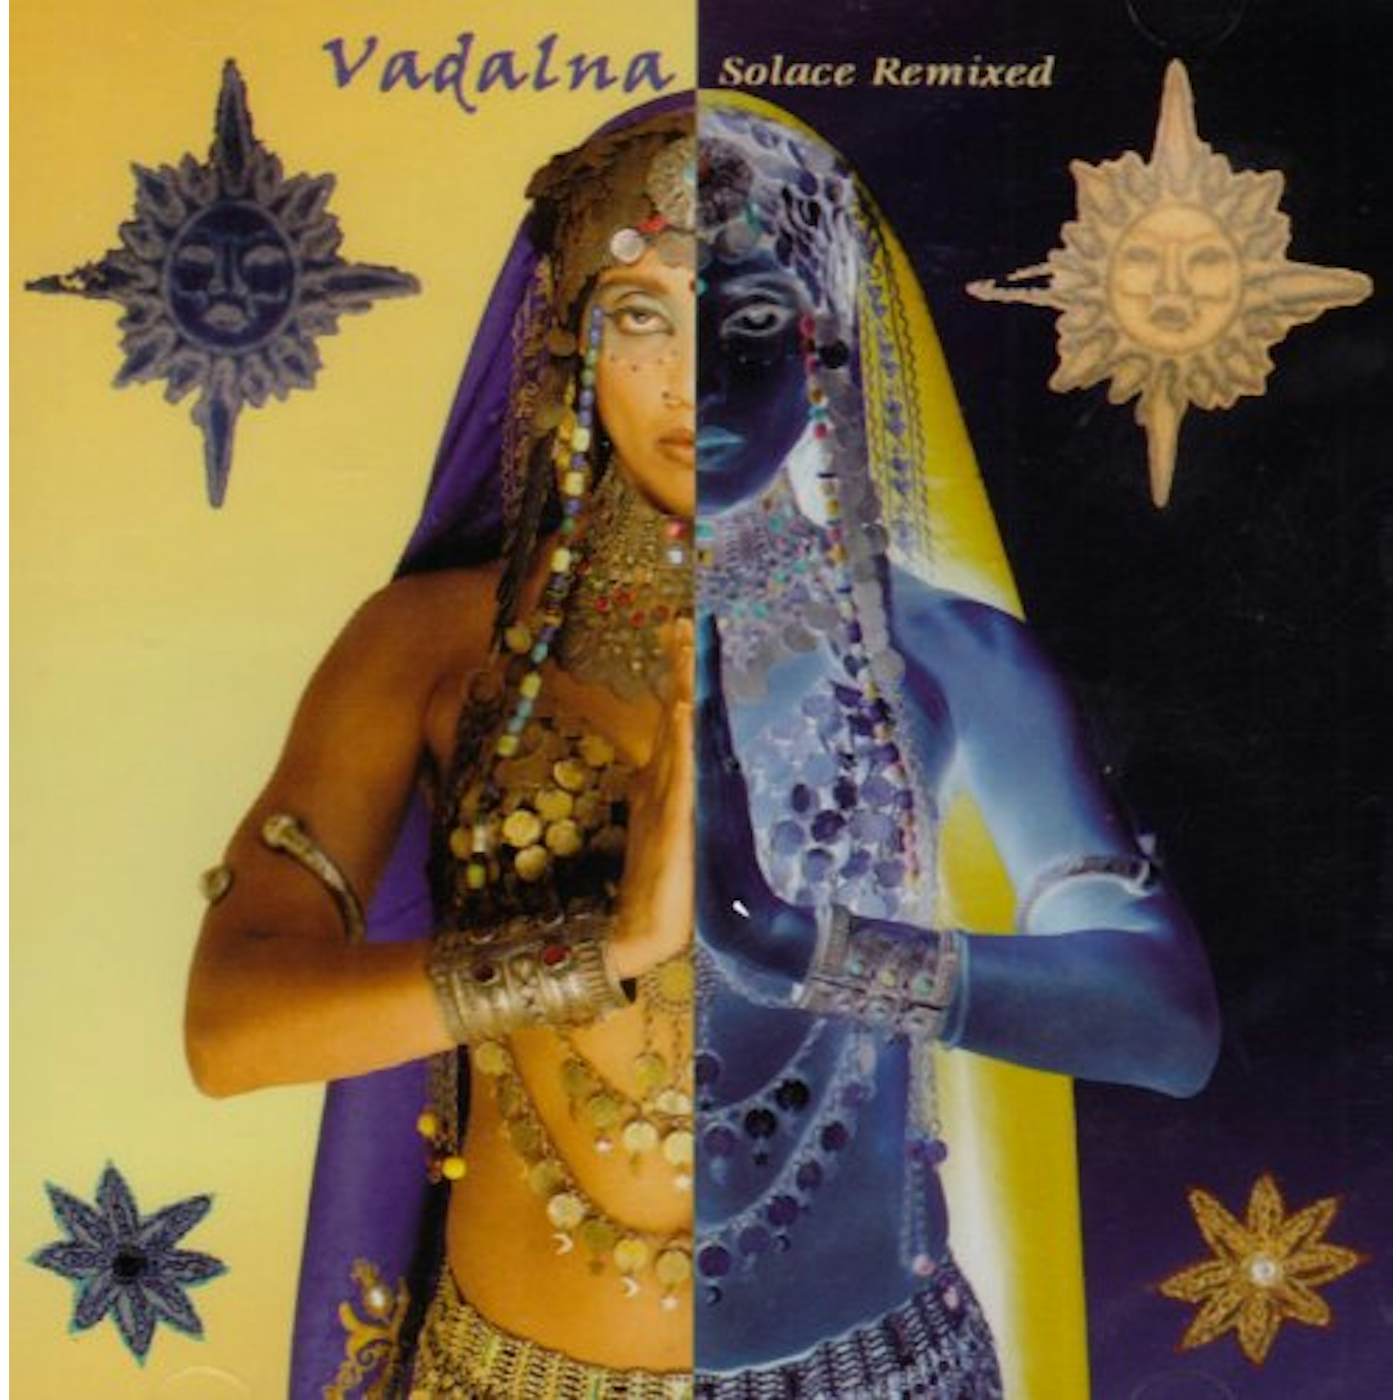 VADALNA: SOLACE REMIXED CD